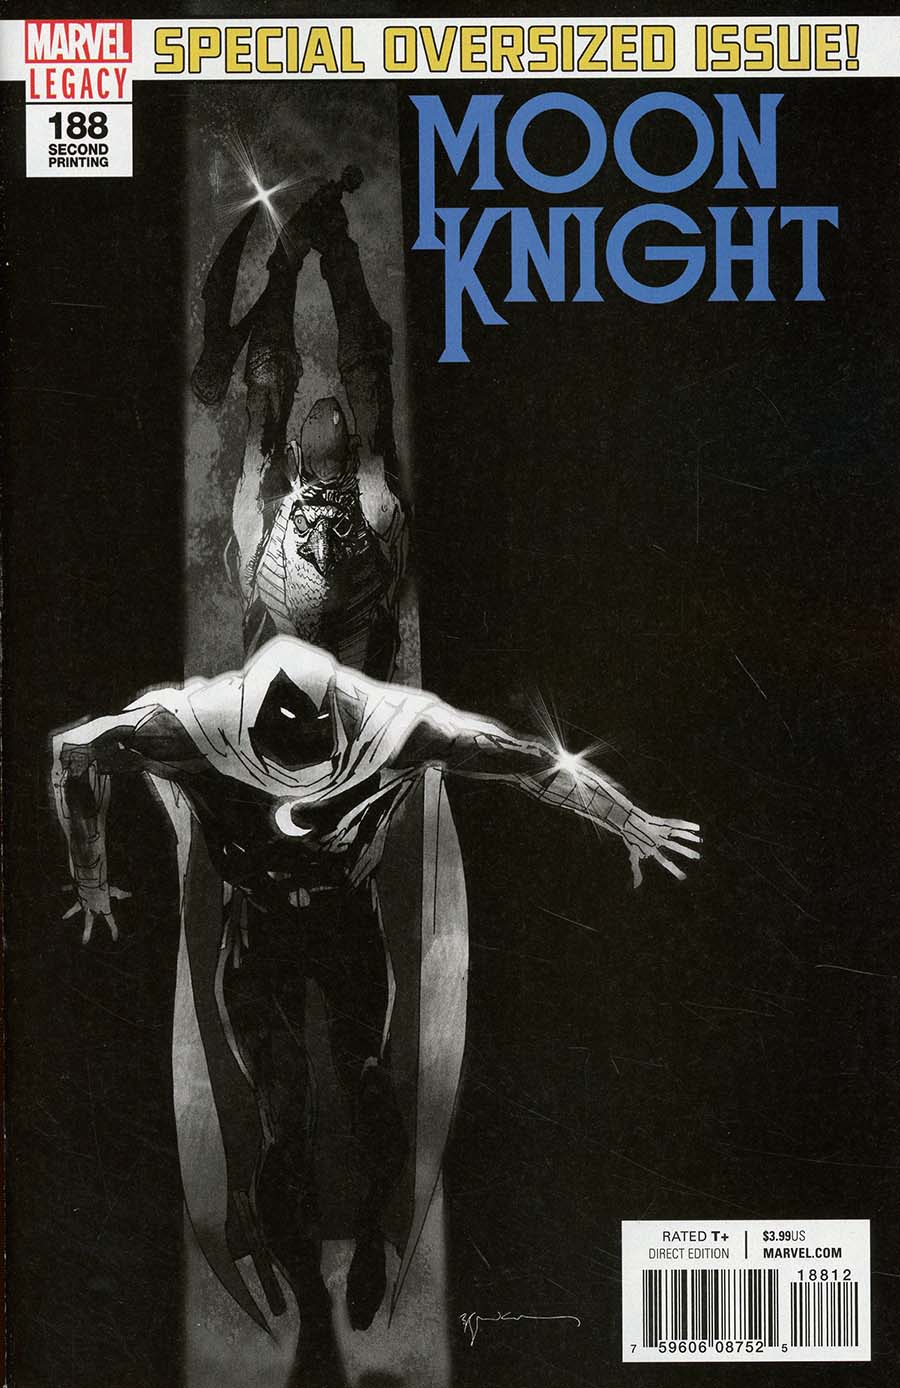 Moon Knight Vol 8 #188 Cover F 2nd Ptg Variant Bill Sienkiewicz Cover (Marvel Legacy Tie-In)